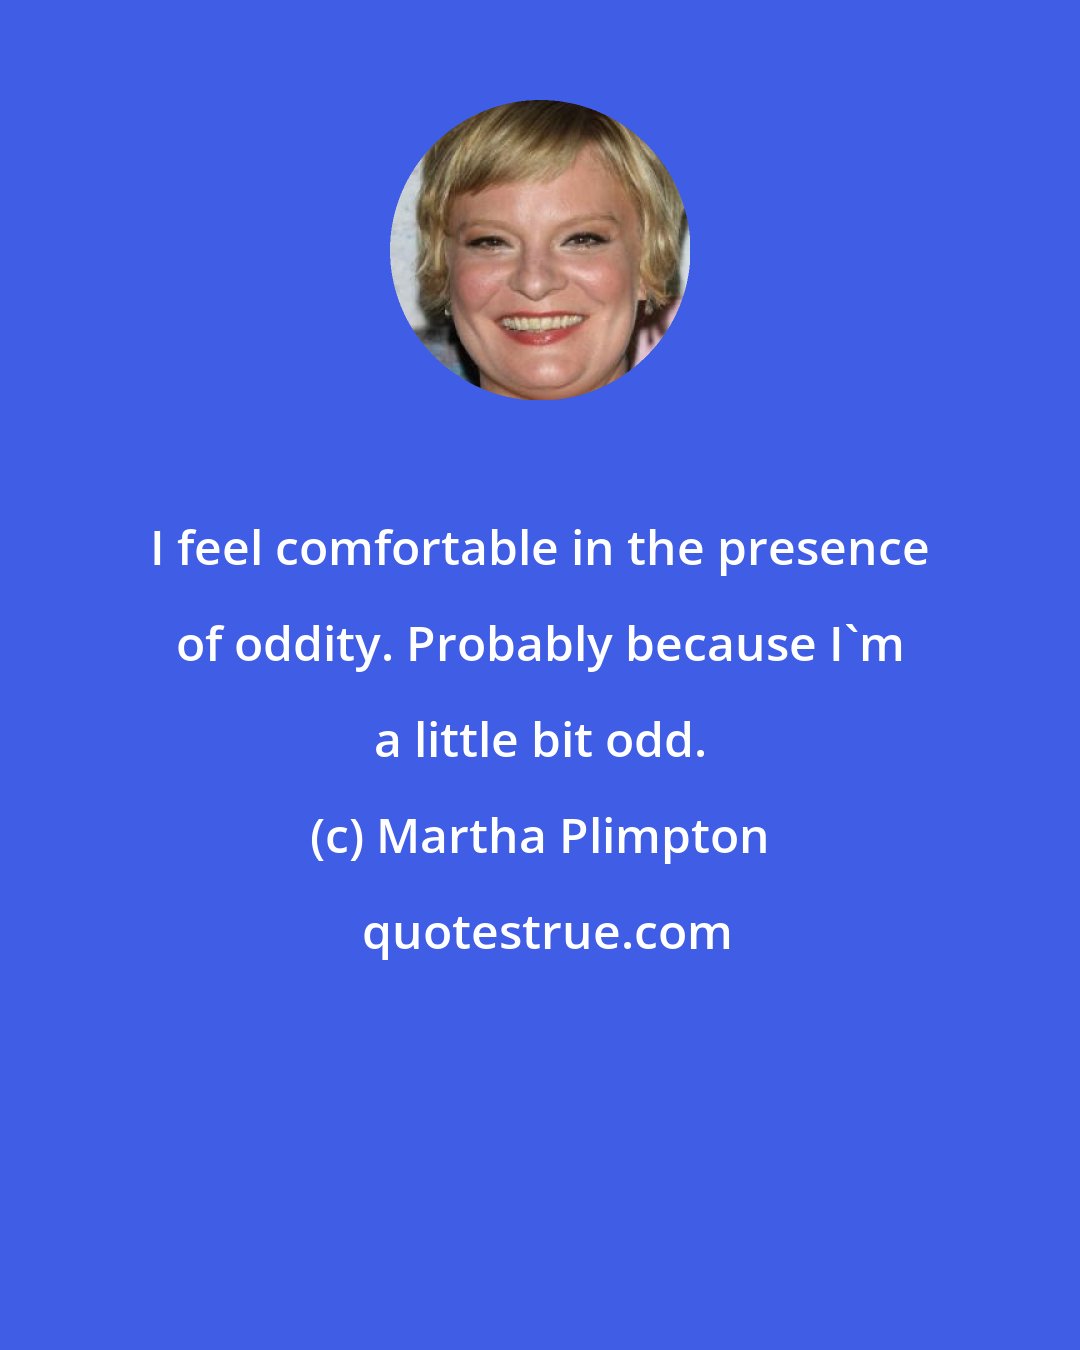 Martha Plimpton: I feel comfortable in the presence of oddity. Probably because I'm a little bit odd.